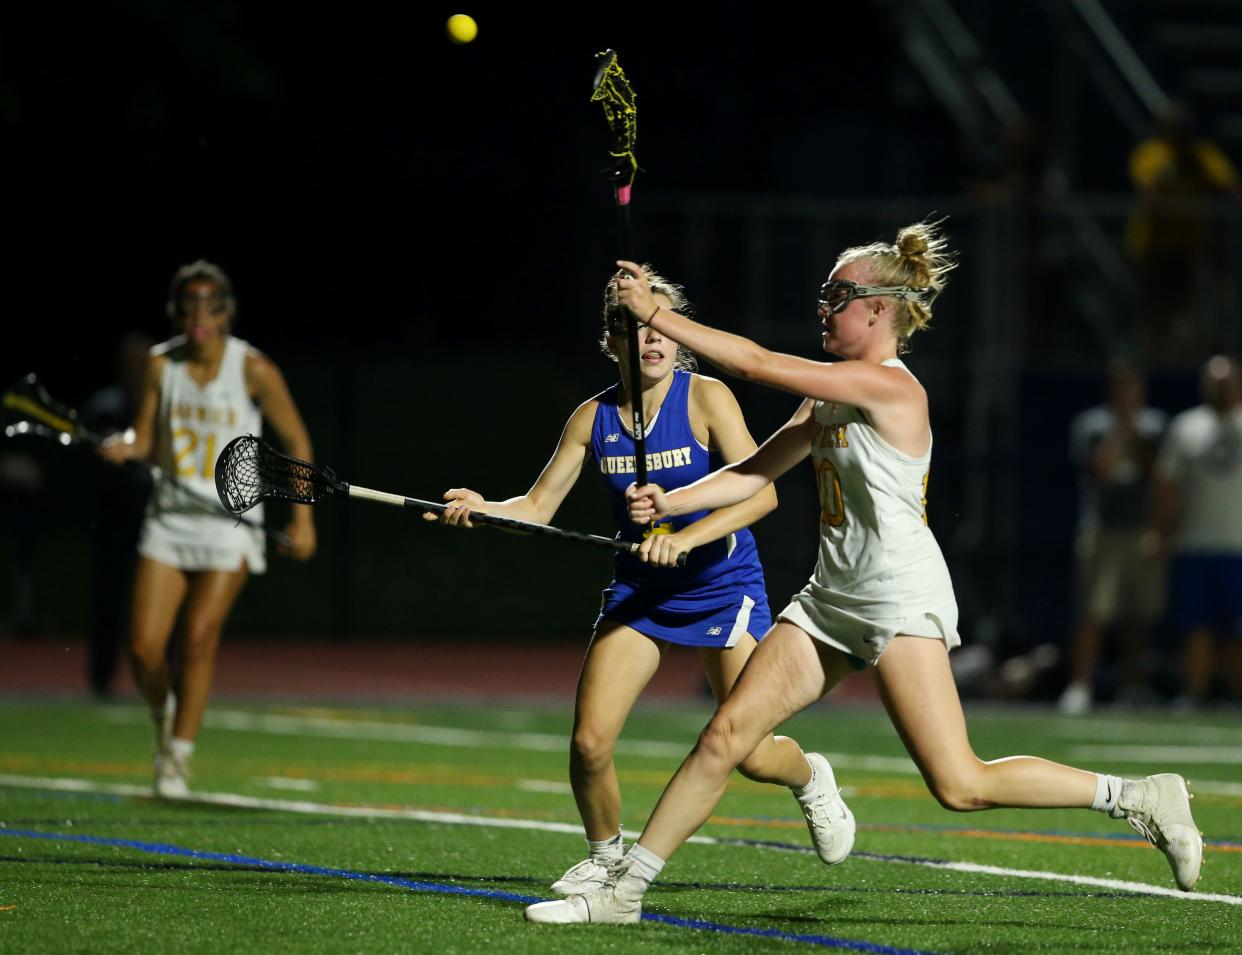 Warwick's Kiera Larney takes a shot on Queensbury's goal during Tuesday's Class B Sub-Regional game on May 31, 2022. 